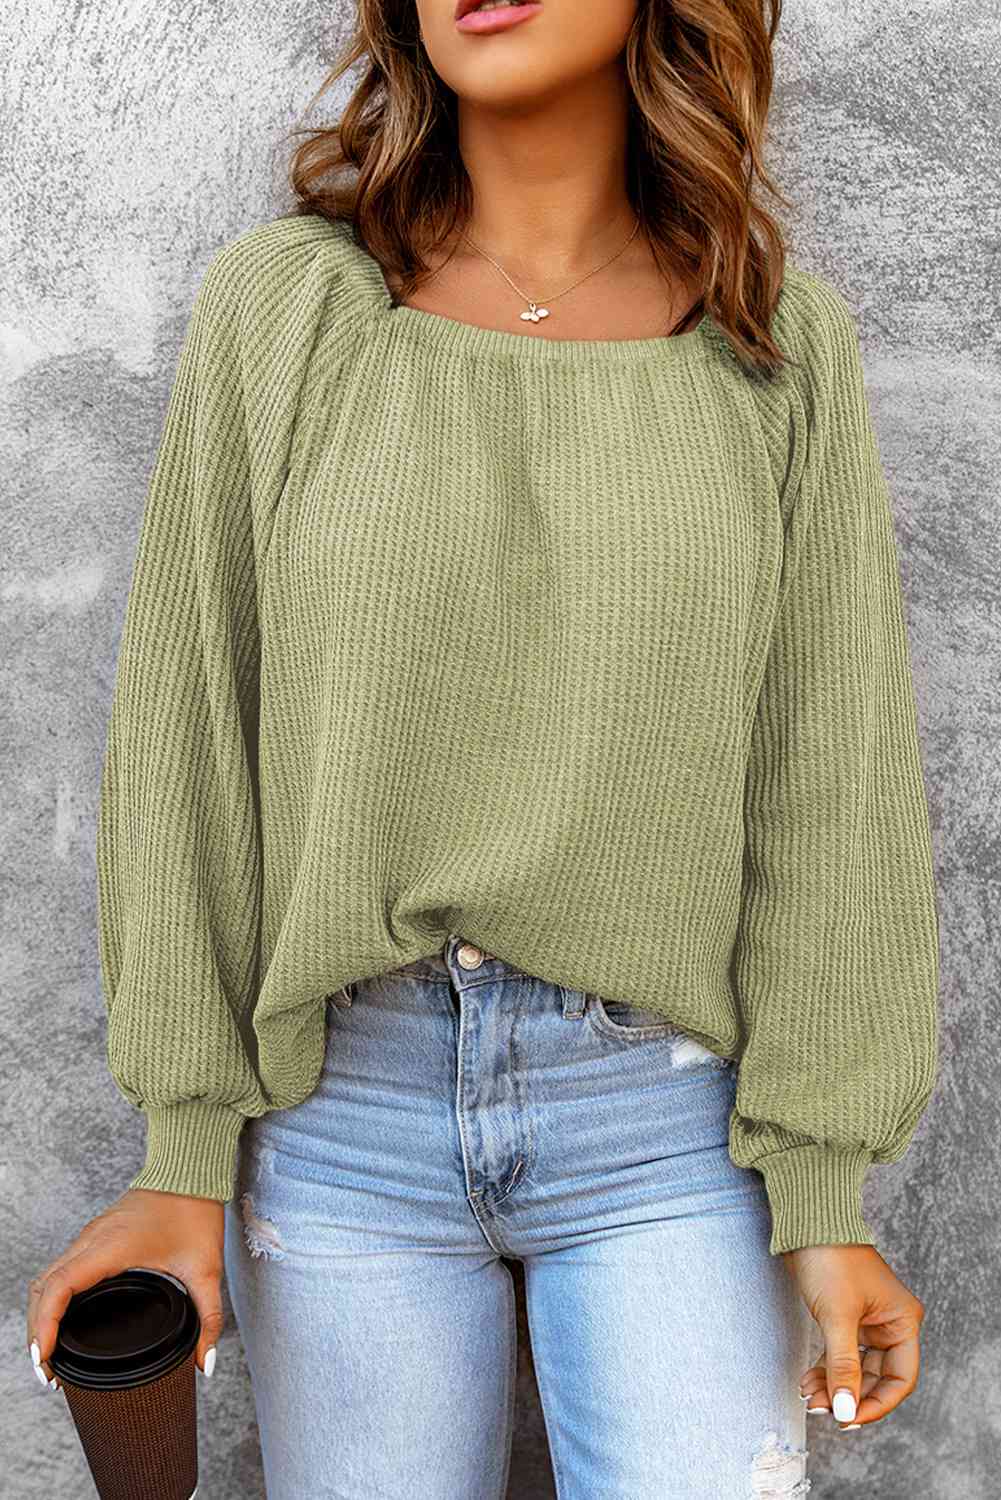 Square Neck Waffle-Knit Top (10 Colors)  Krazy Heart Designs Boutique Light Green S 